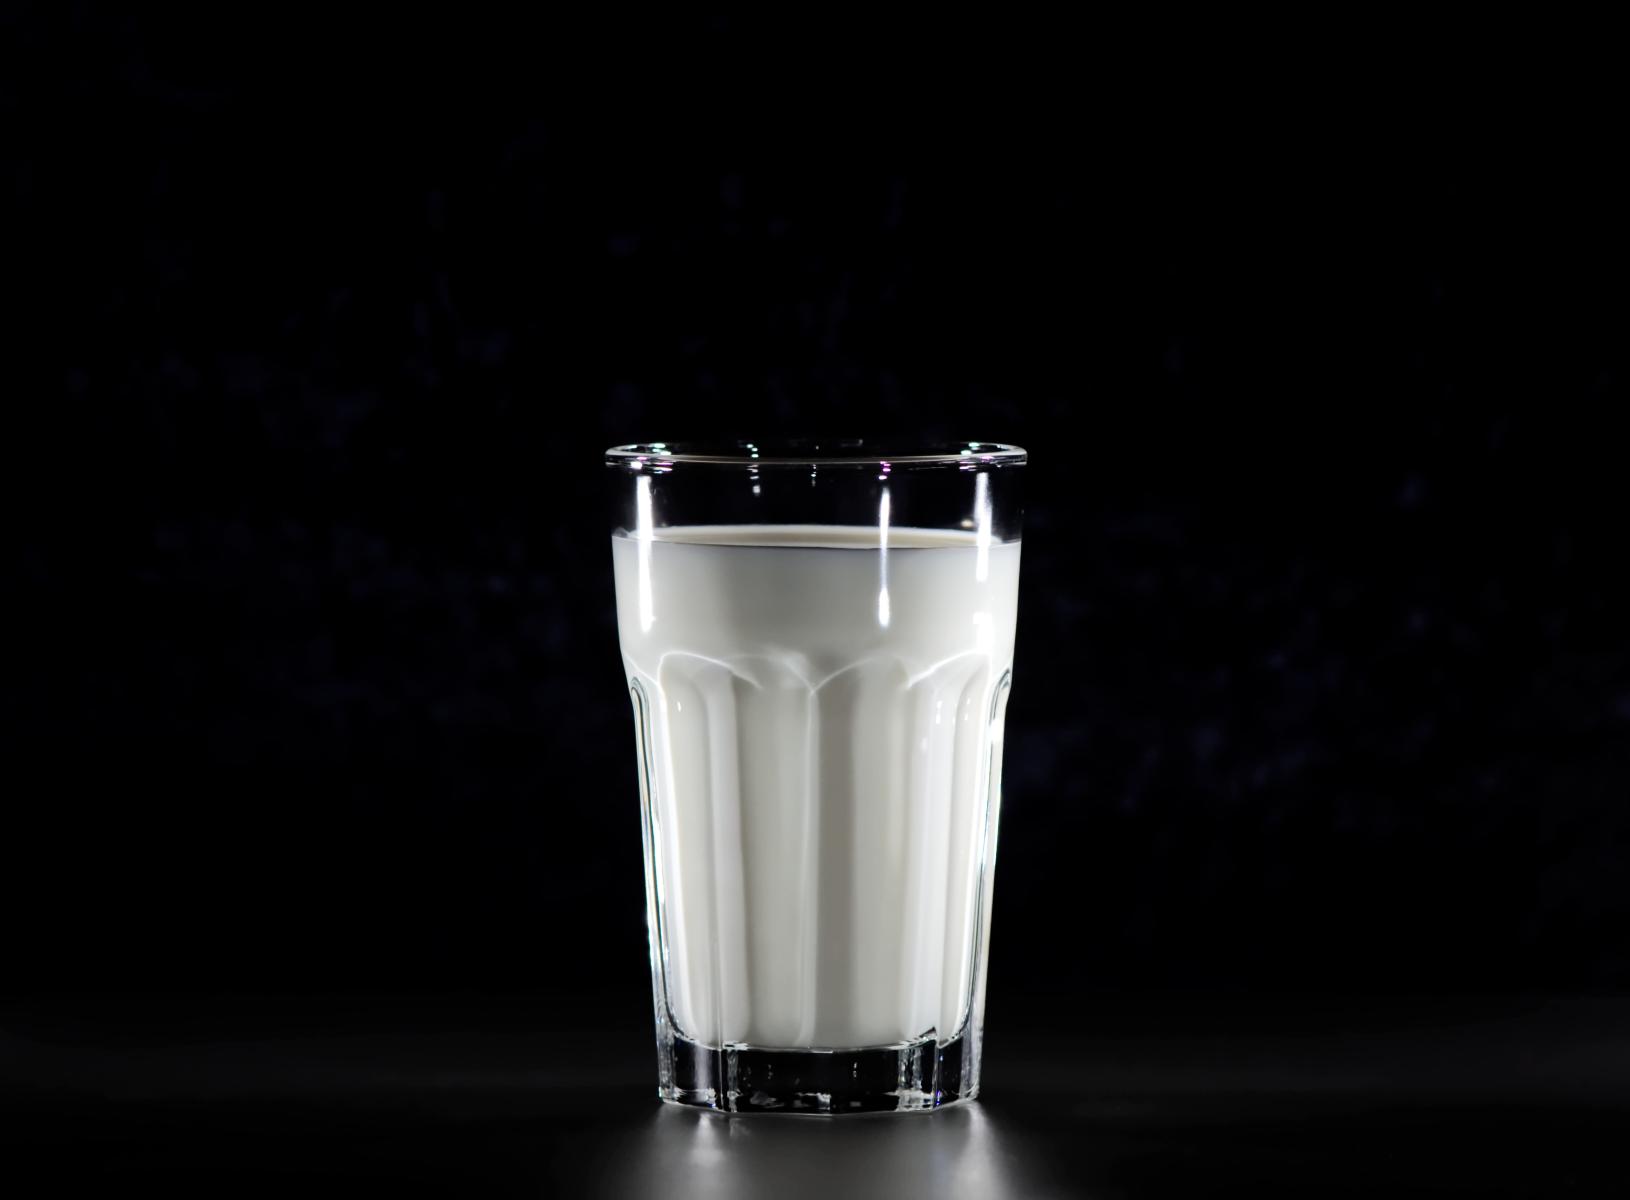 Milk in a glass on a black background